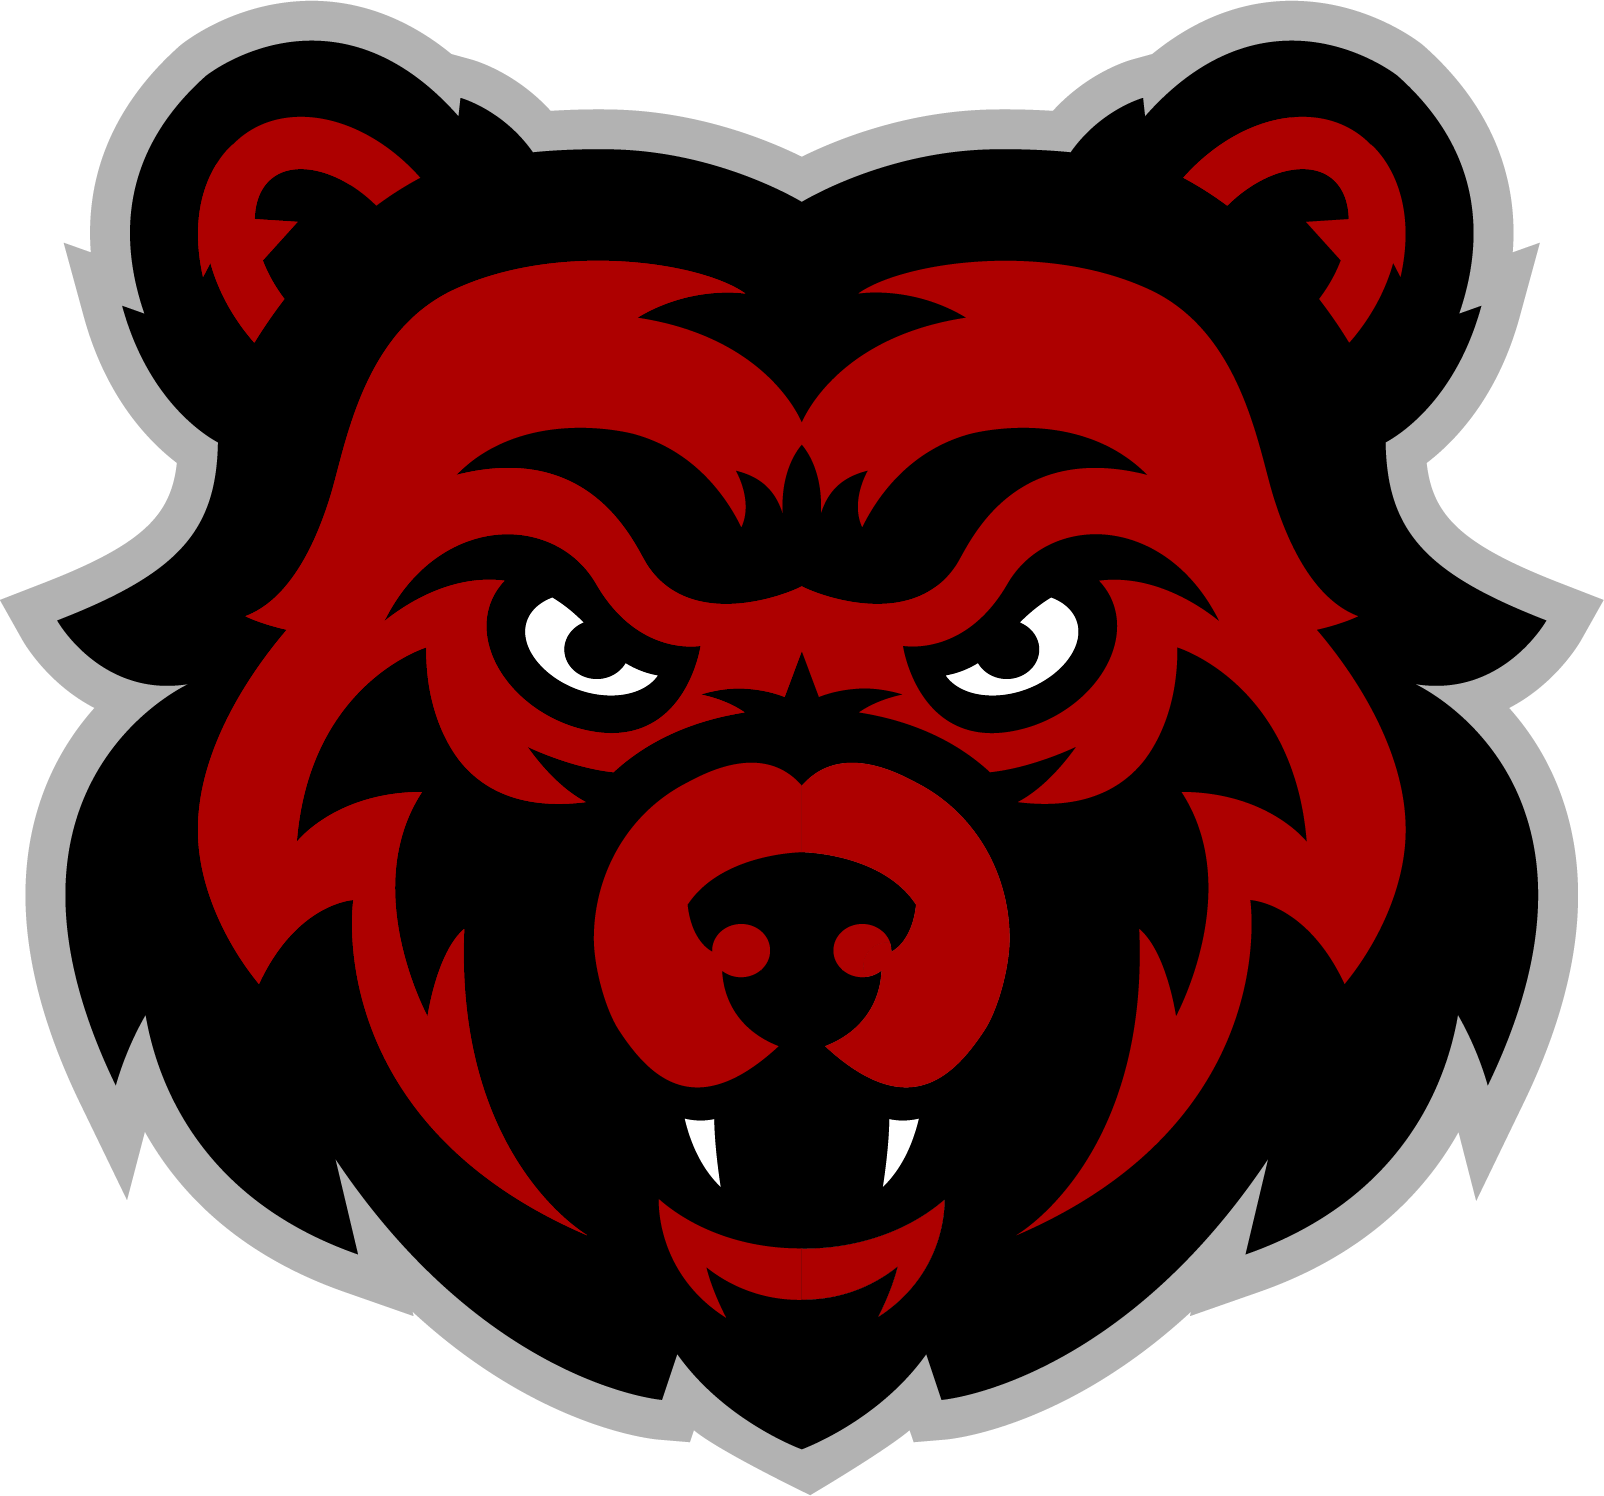 Red and Black Bear Logo - Branding Guide Park City Elementary - Barren County School District